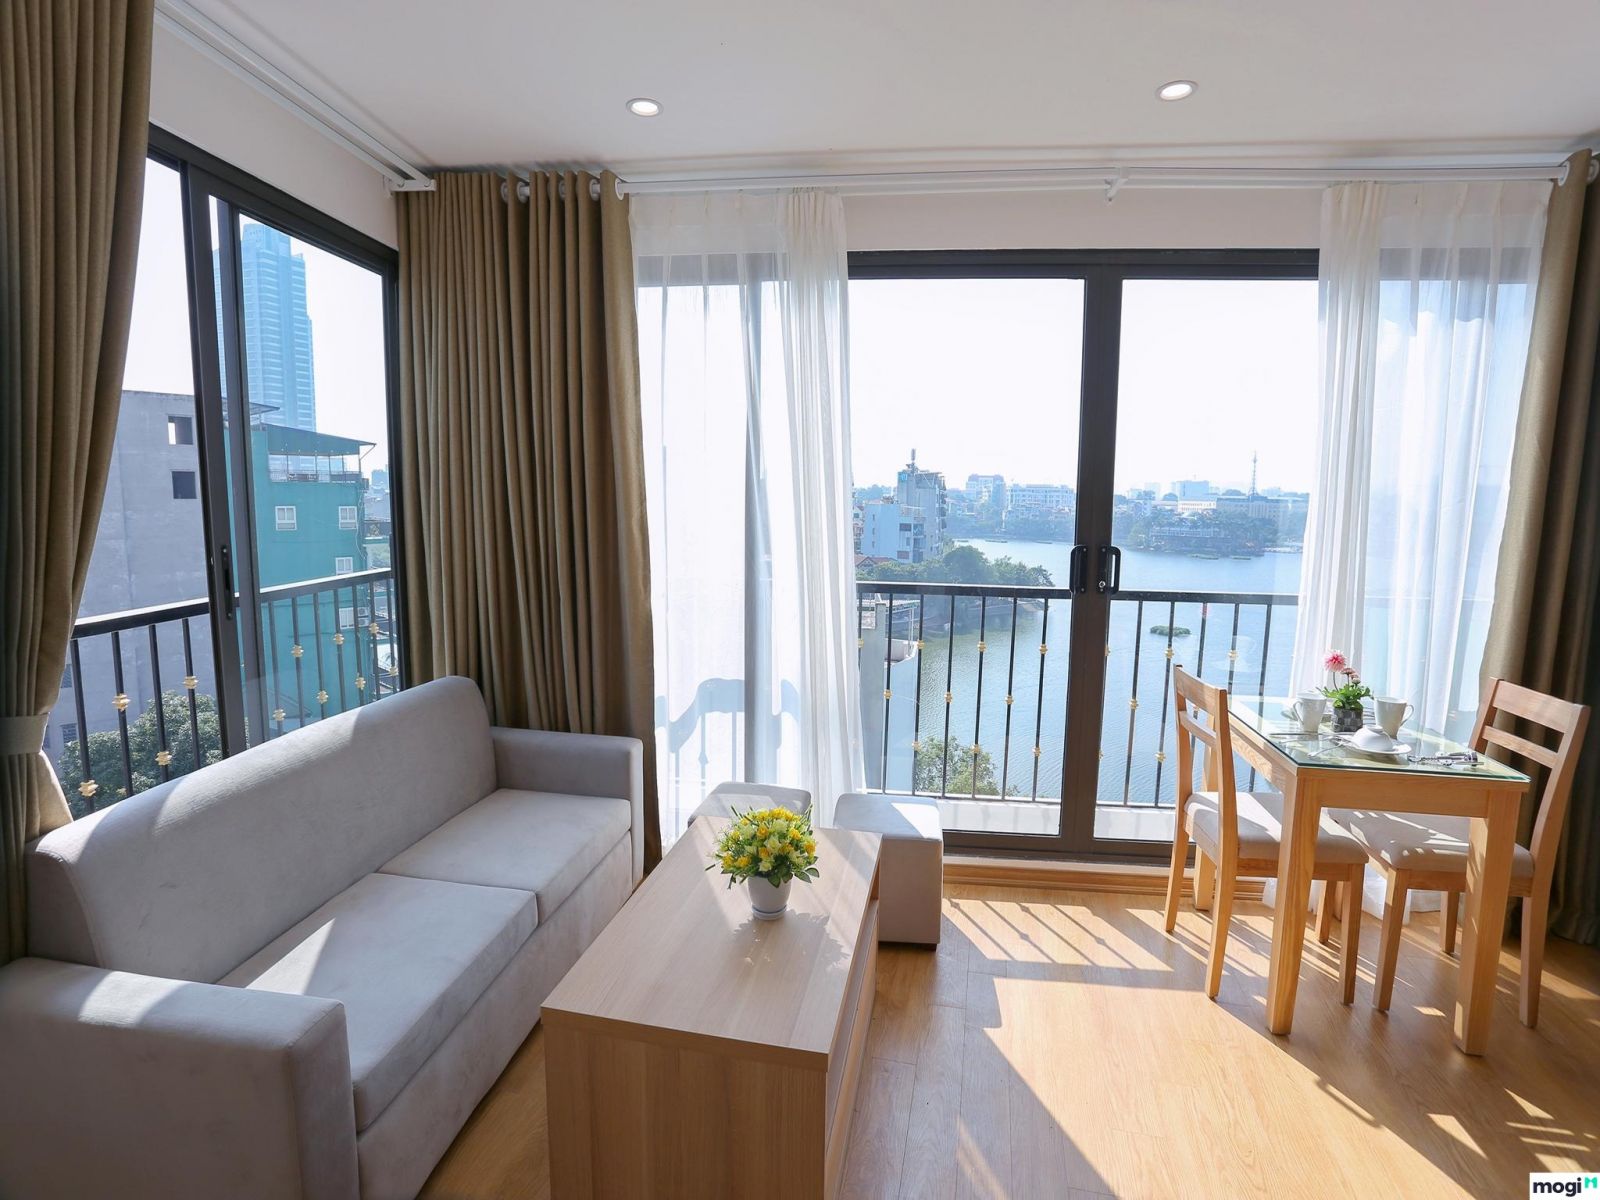 The Ho Chi Minh City’s apartment for sale market is stepping into the growth slowing stage of the price cycle.